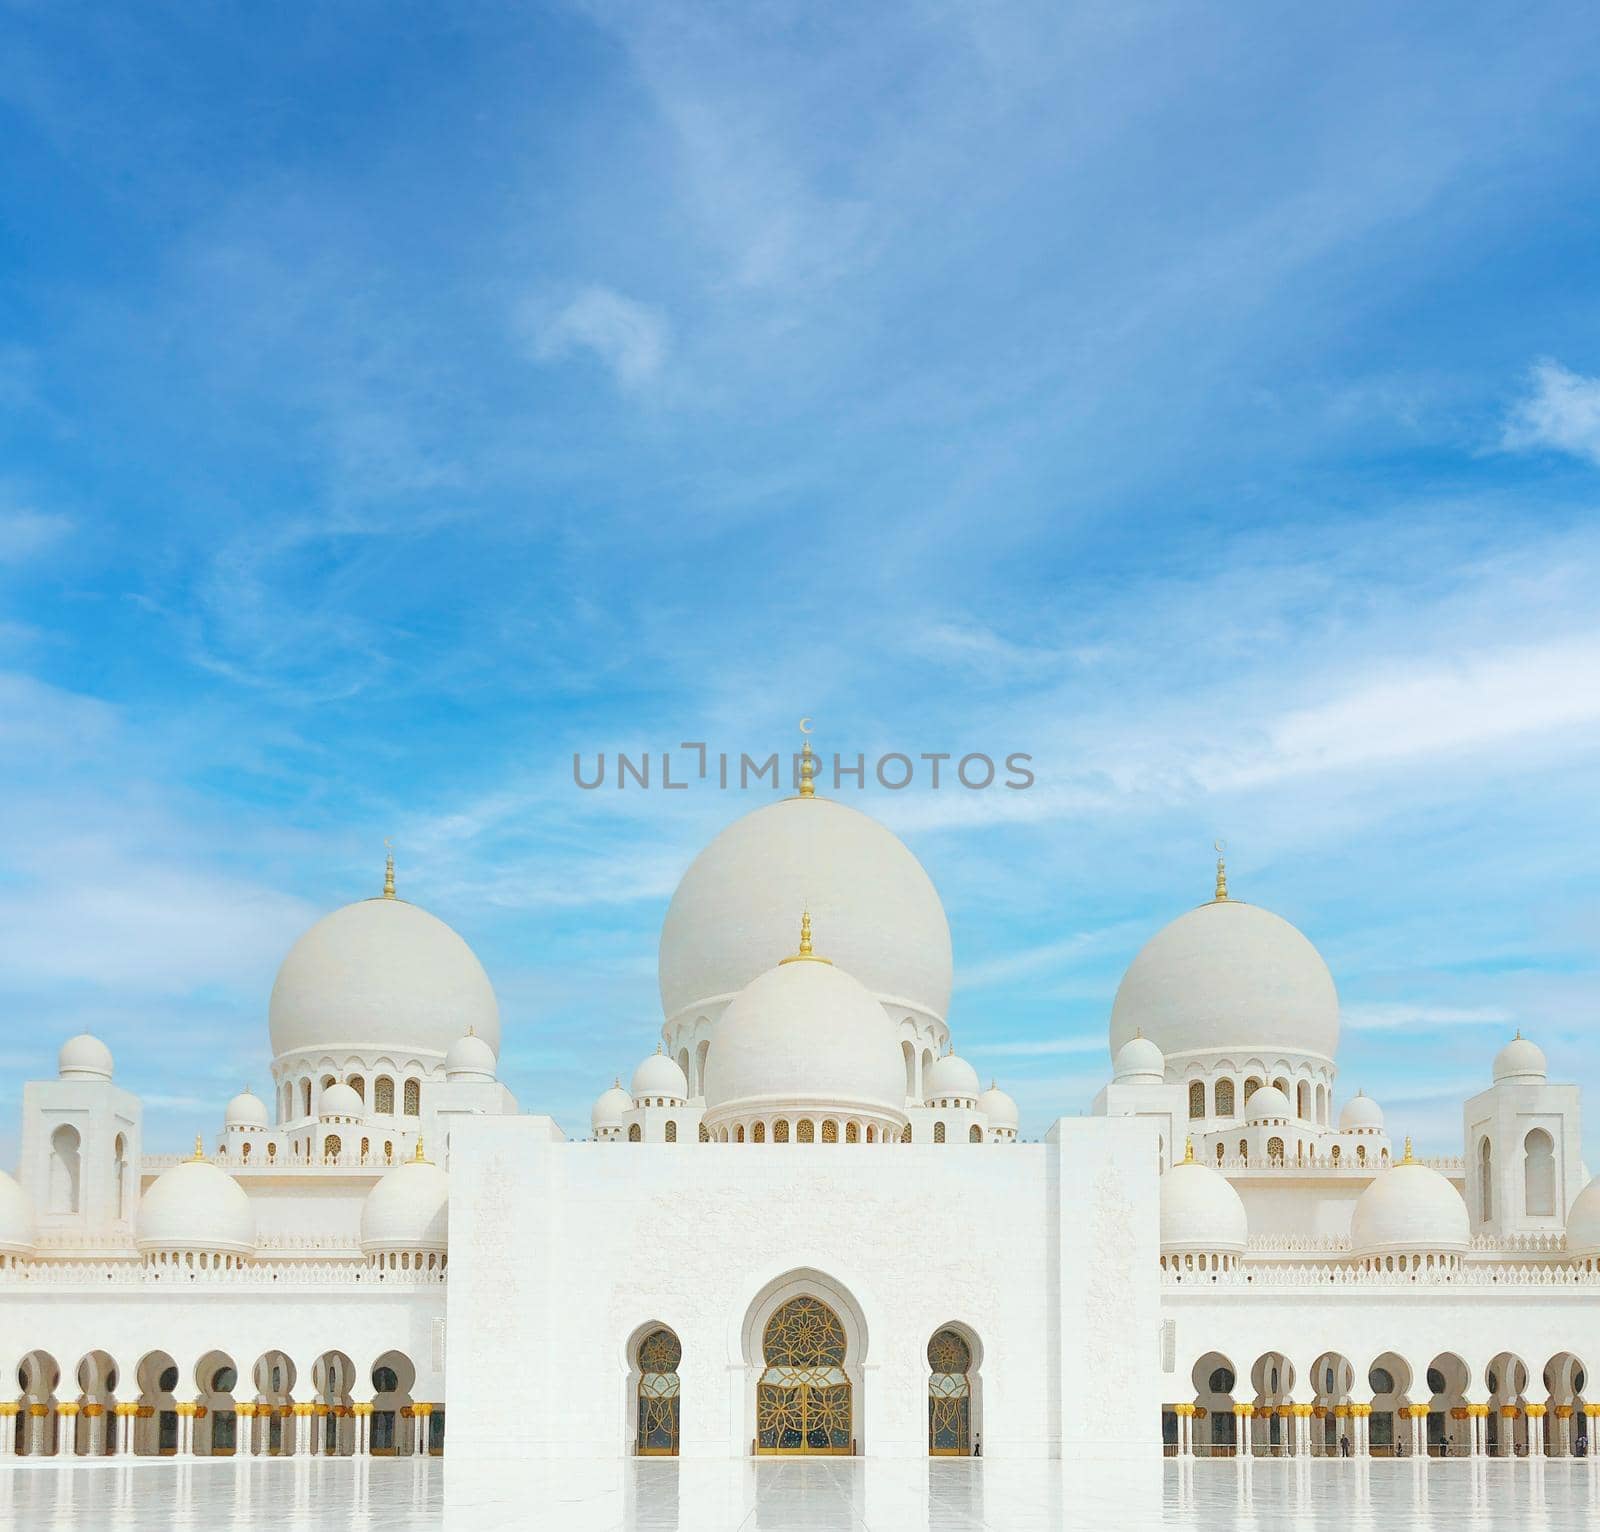 After sunset mosque. landscape with beautiful mosques and minarets. Place your text here. Ramadan kareem. High quality photo